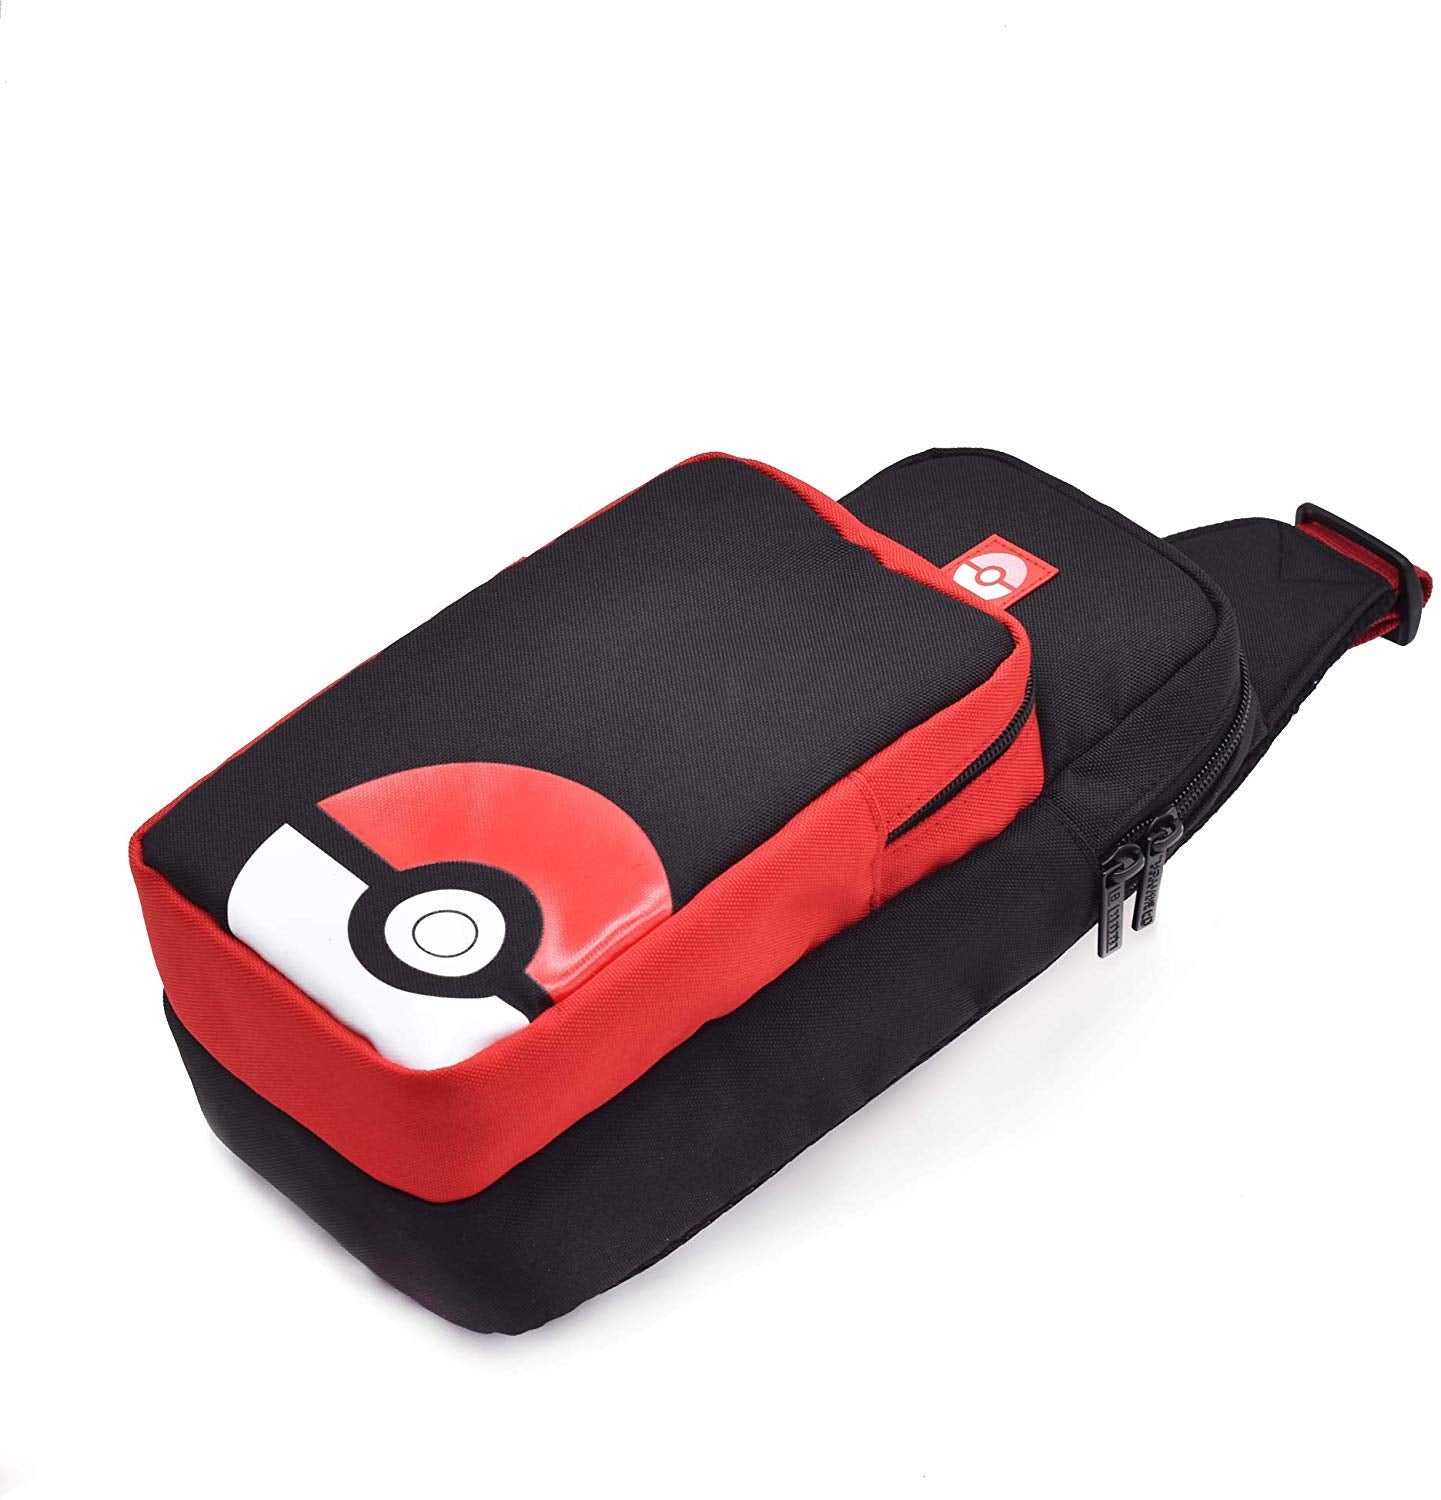 Hori Go Pack Pouch Bag Case for Nintendo Switch - Poke Ball Edition